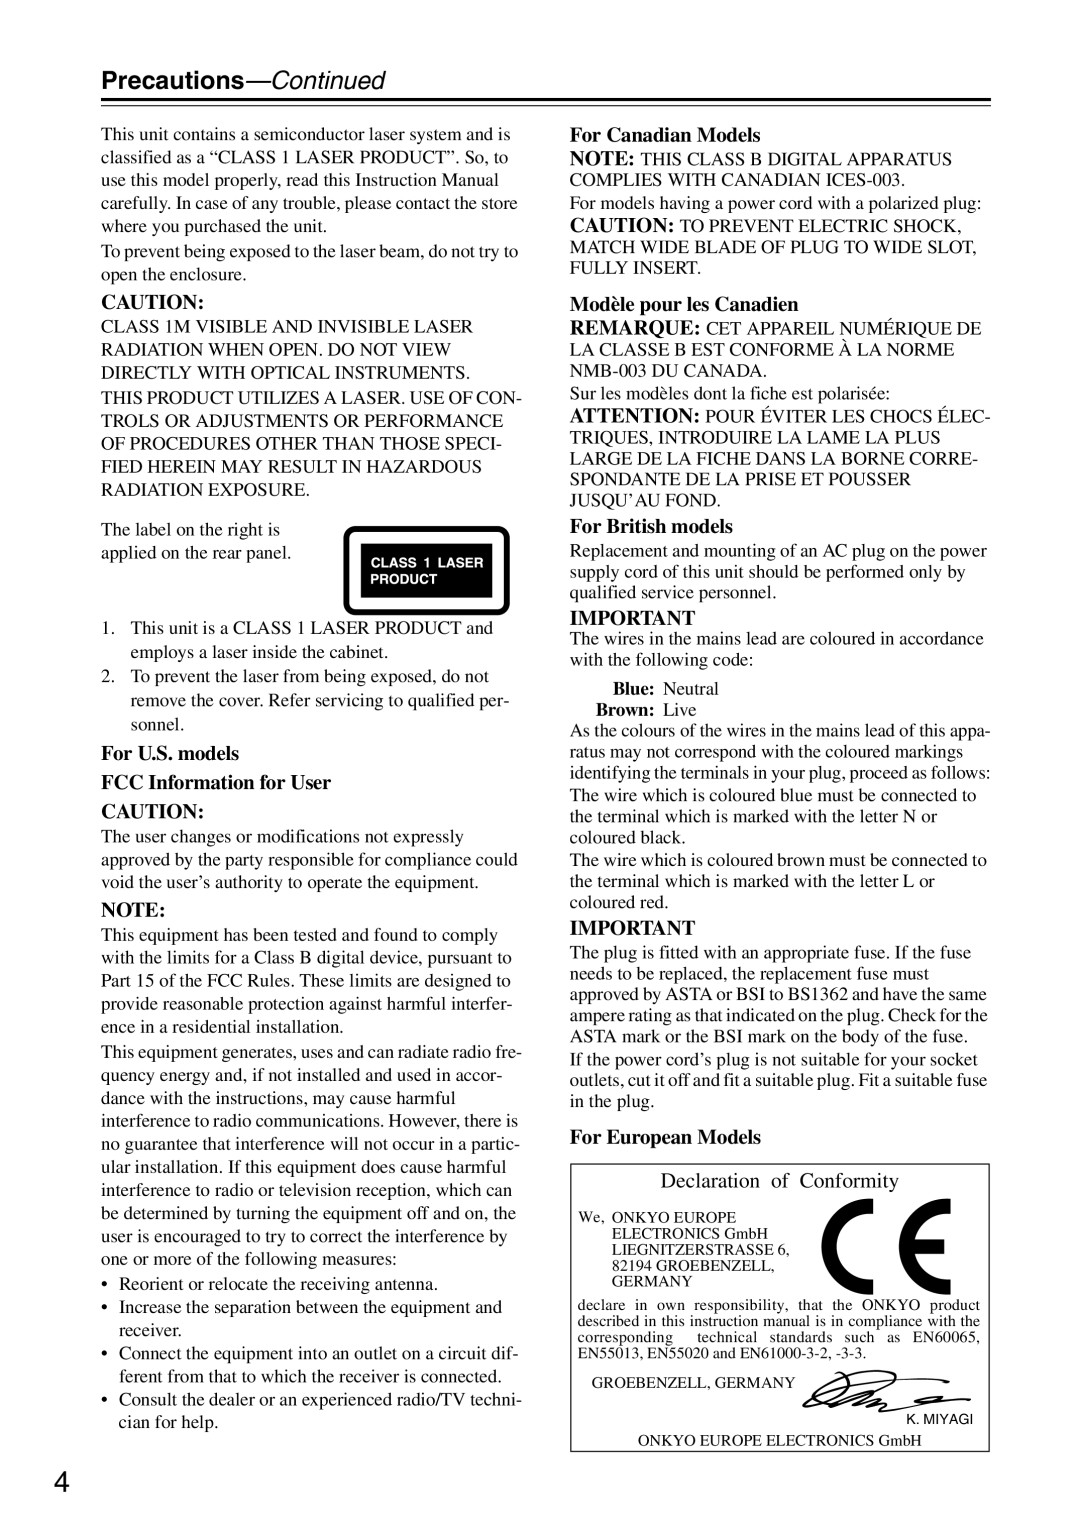 Onkyo CR-325 Precautions-Continued, Declaration of Conformity, For U.S. models FCC Information for User, Brown Live 